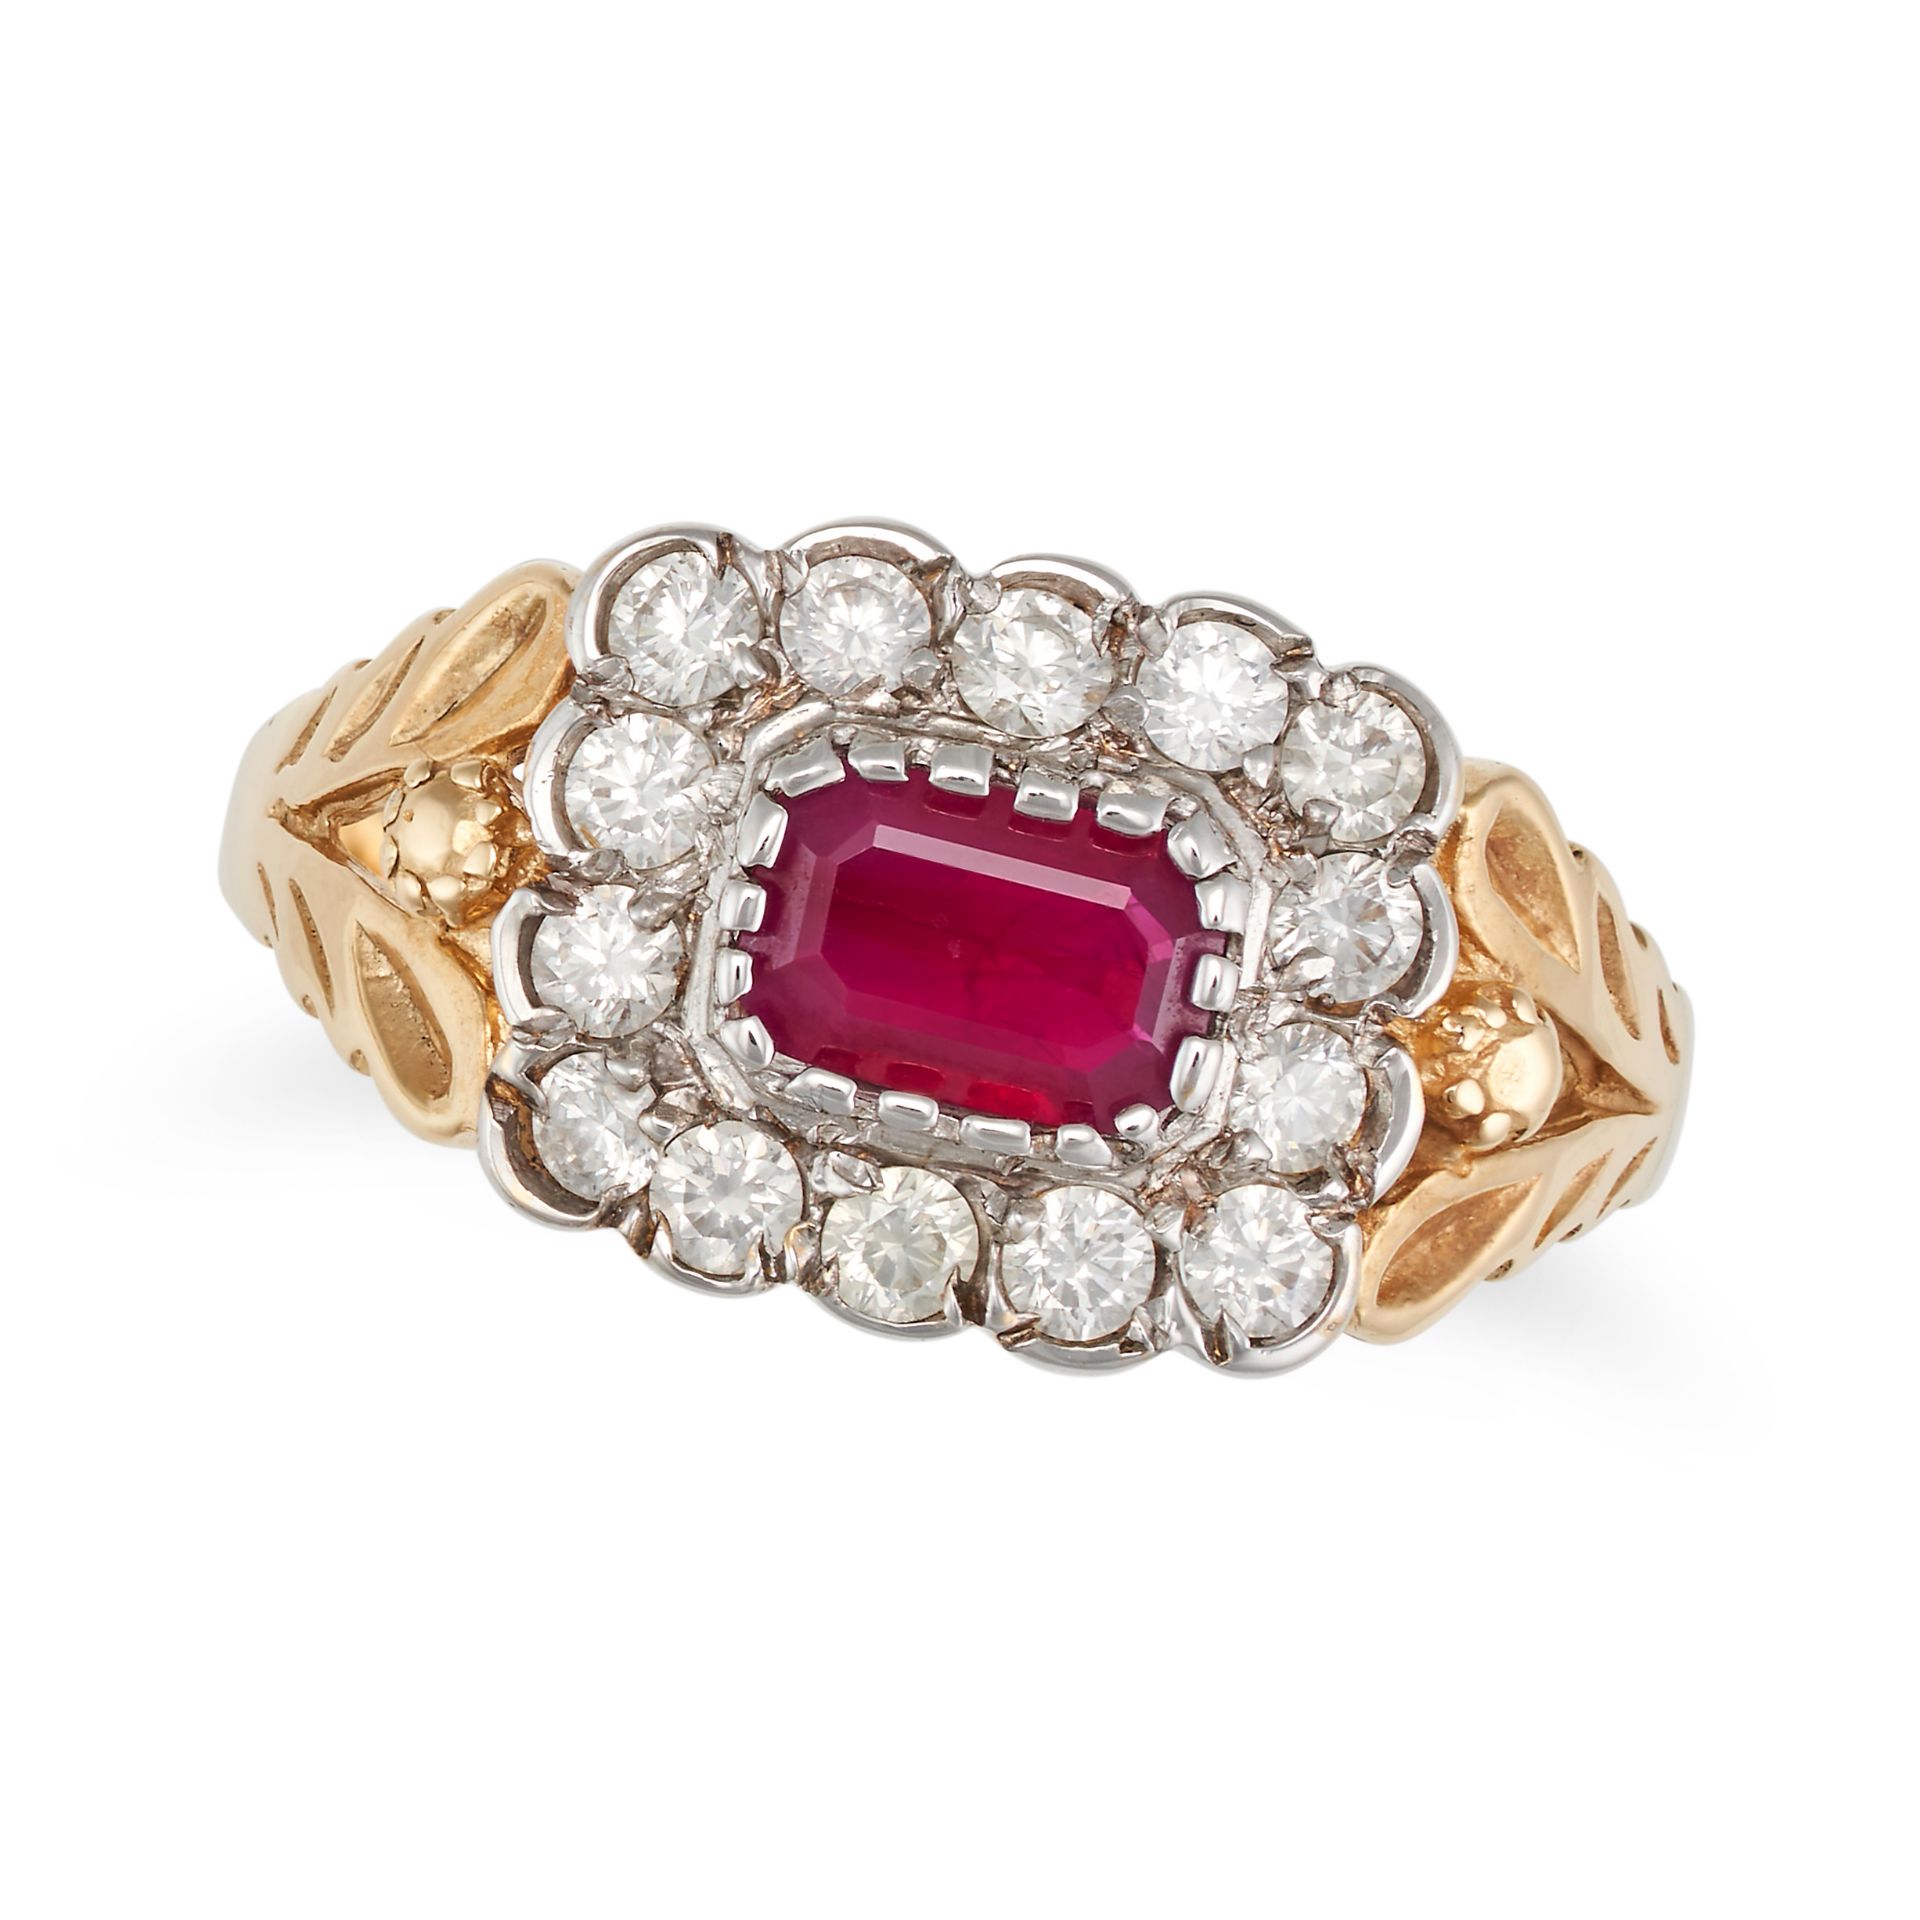 A RUBY AND DIAMOND CLUSTER RING in 18ct yellow and white gold, set with a cushion cut ruby in a c...